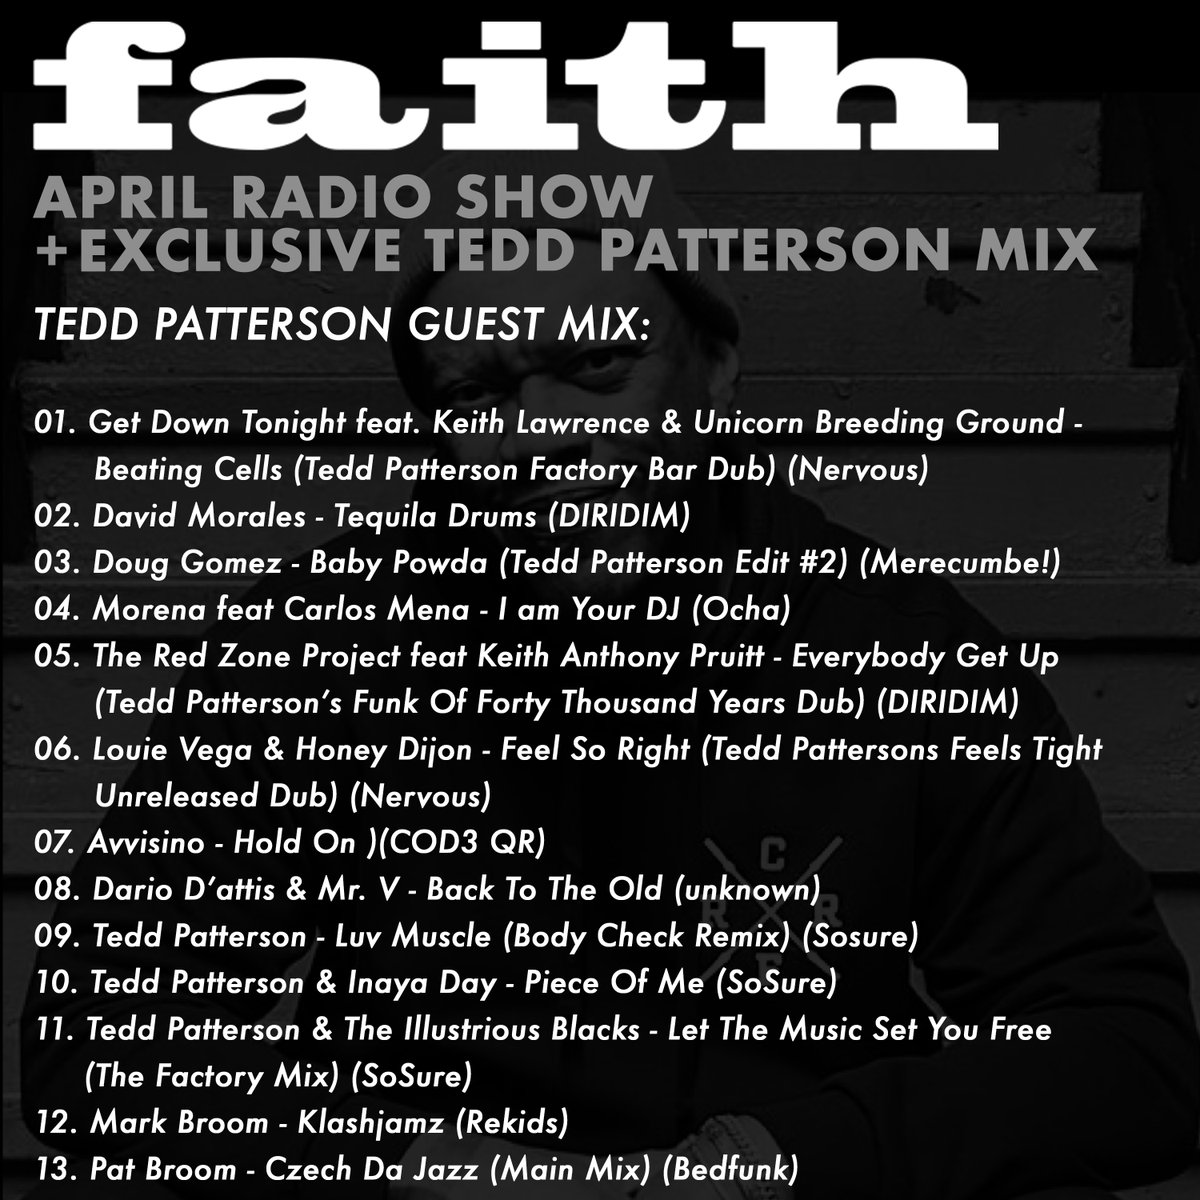 Our semi-regular / when we can make it happen Radio Show is back. Live on Soundcloud & Mixcloud now to check out. 2hrs of 100% House from Stu & @terrystuckshop + Faith fave @teddpatterson special guest mix soundcloud.com/faithfanzine/f…